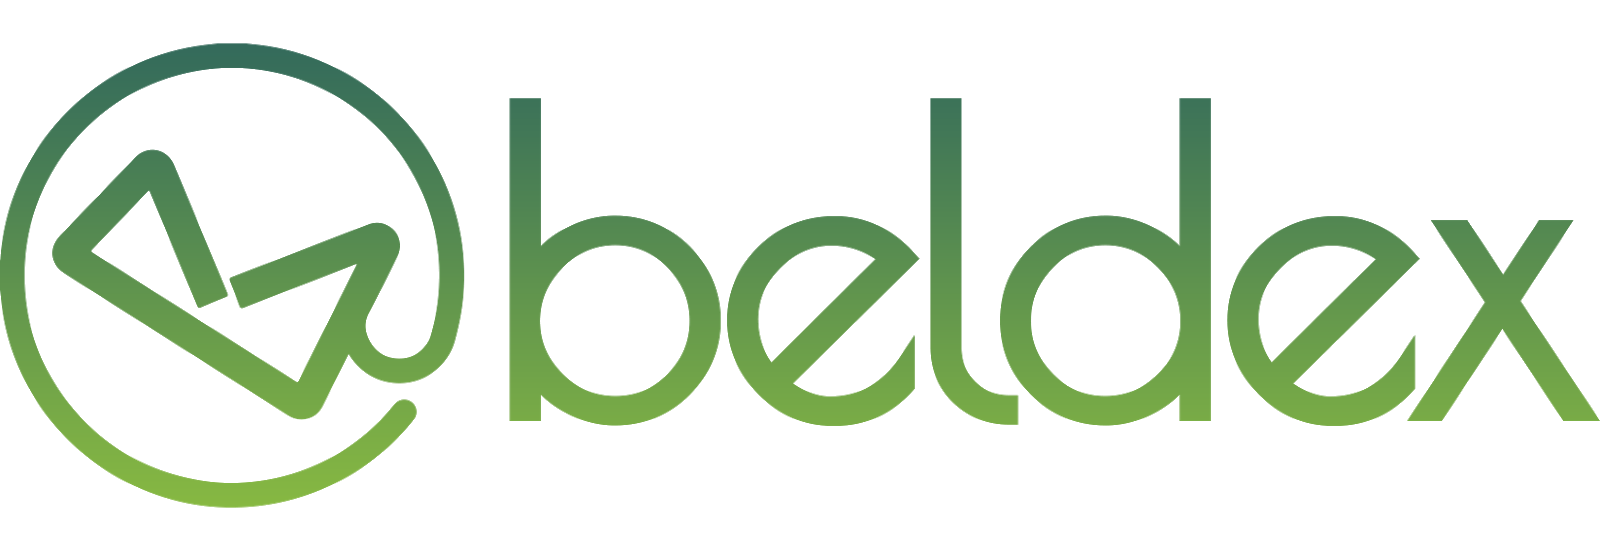 Https signup php. BELDEX Coin. Белдэкс.